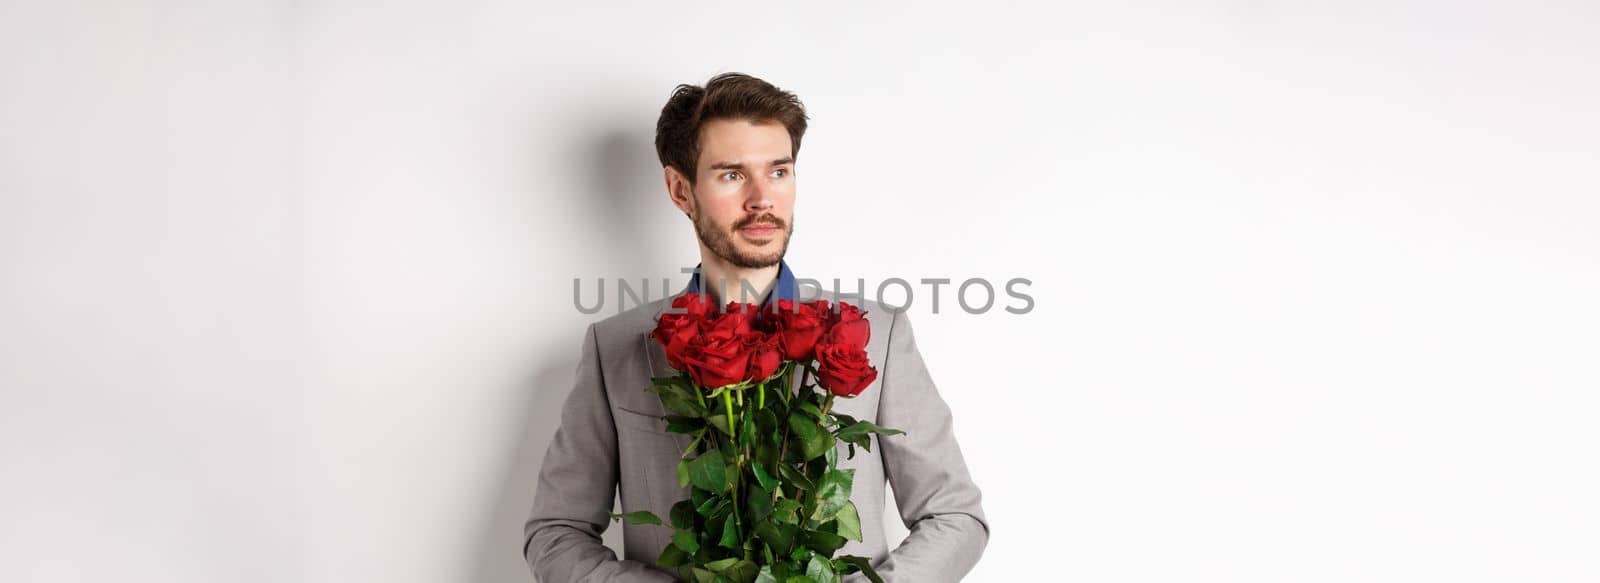 Handsome boyfriend in suit going on romantic date, holding bouquet of red roses and looking left thoughtful, standing over white background.